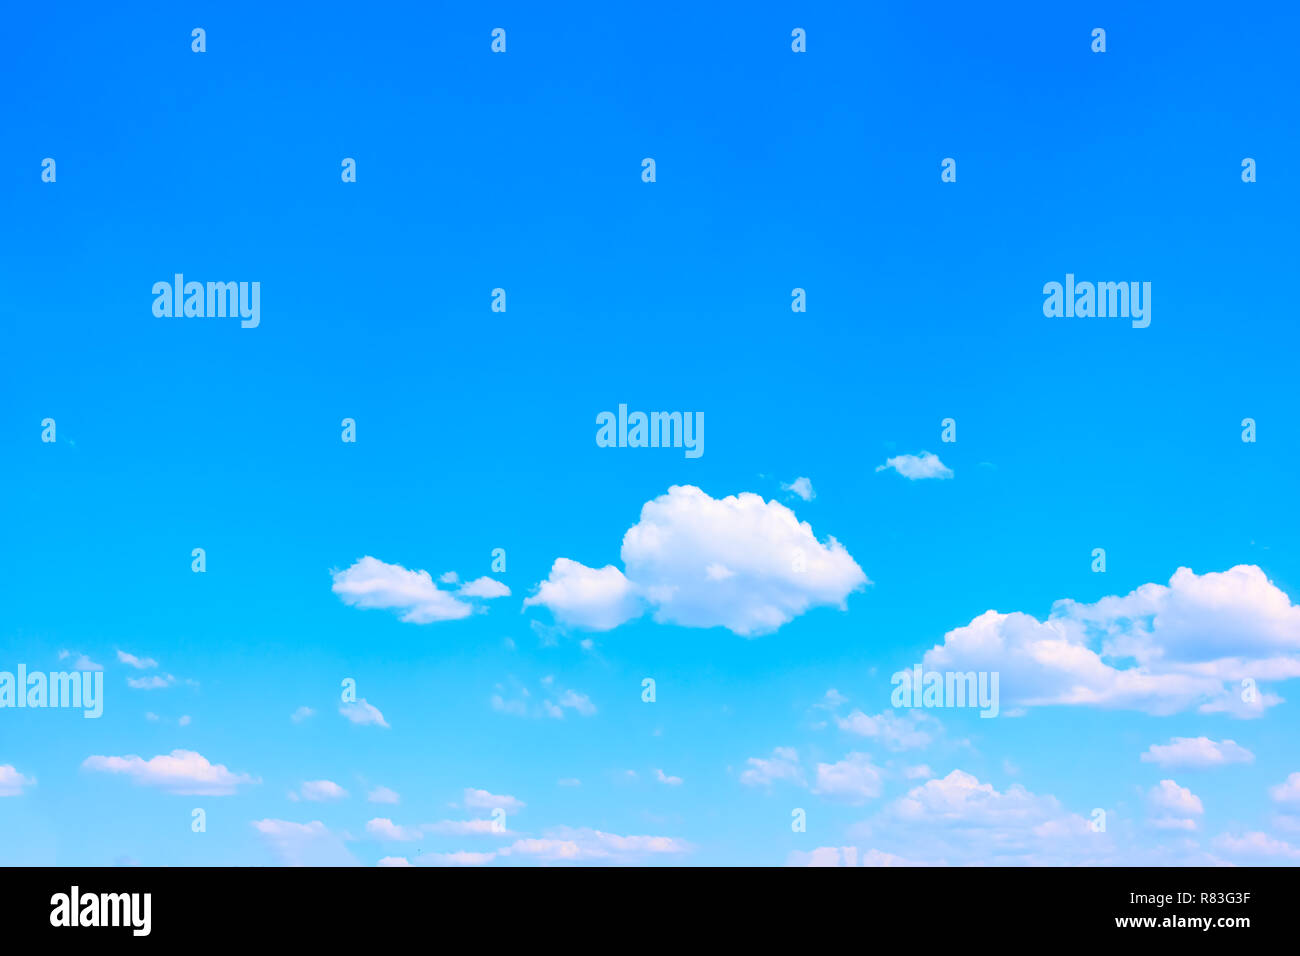 Good weather - Blue sky with white clouds - background with space for your own text Stock Photo